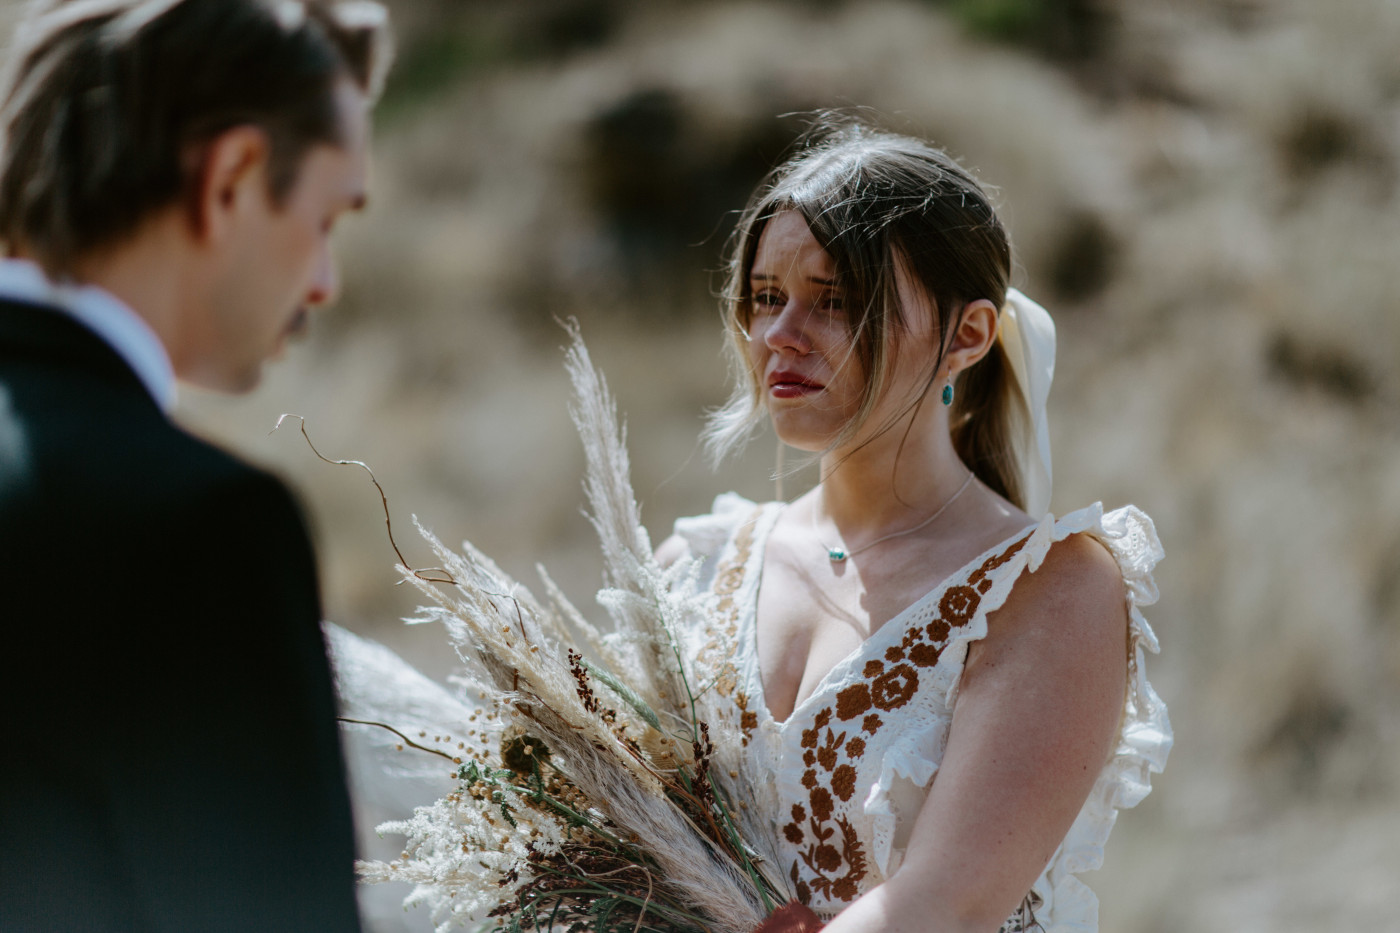 Greyson and Emily during their elopement. Elopement photography in the Central Oregon desert by Sienna Plus Josh.